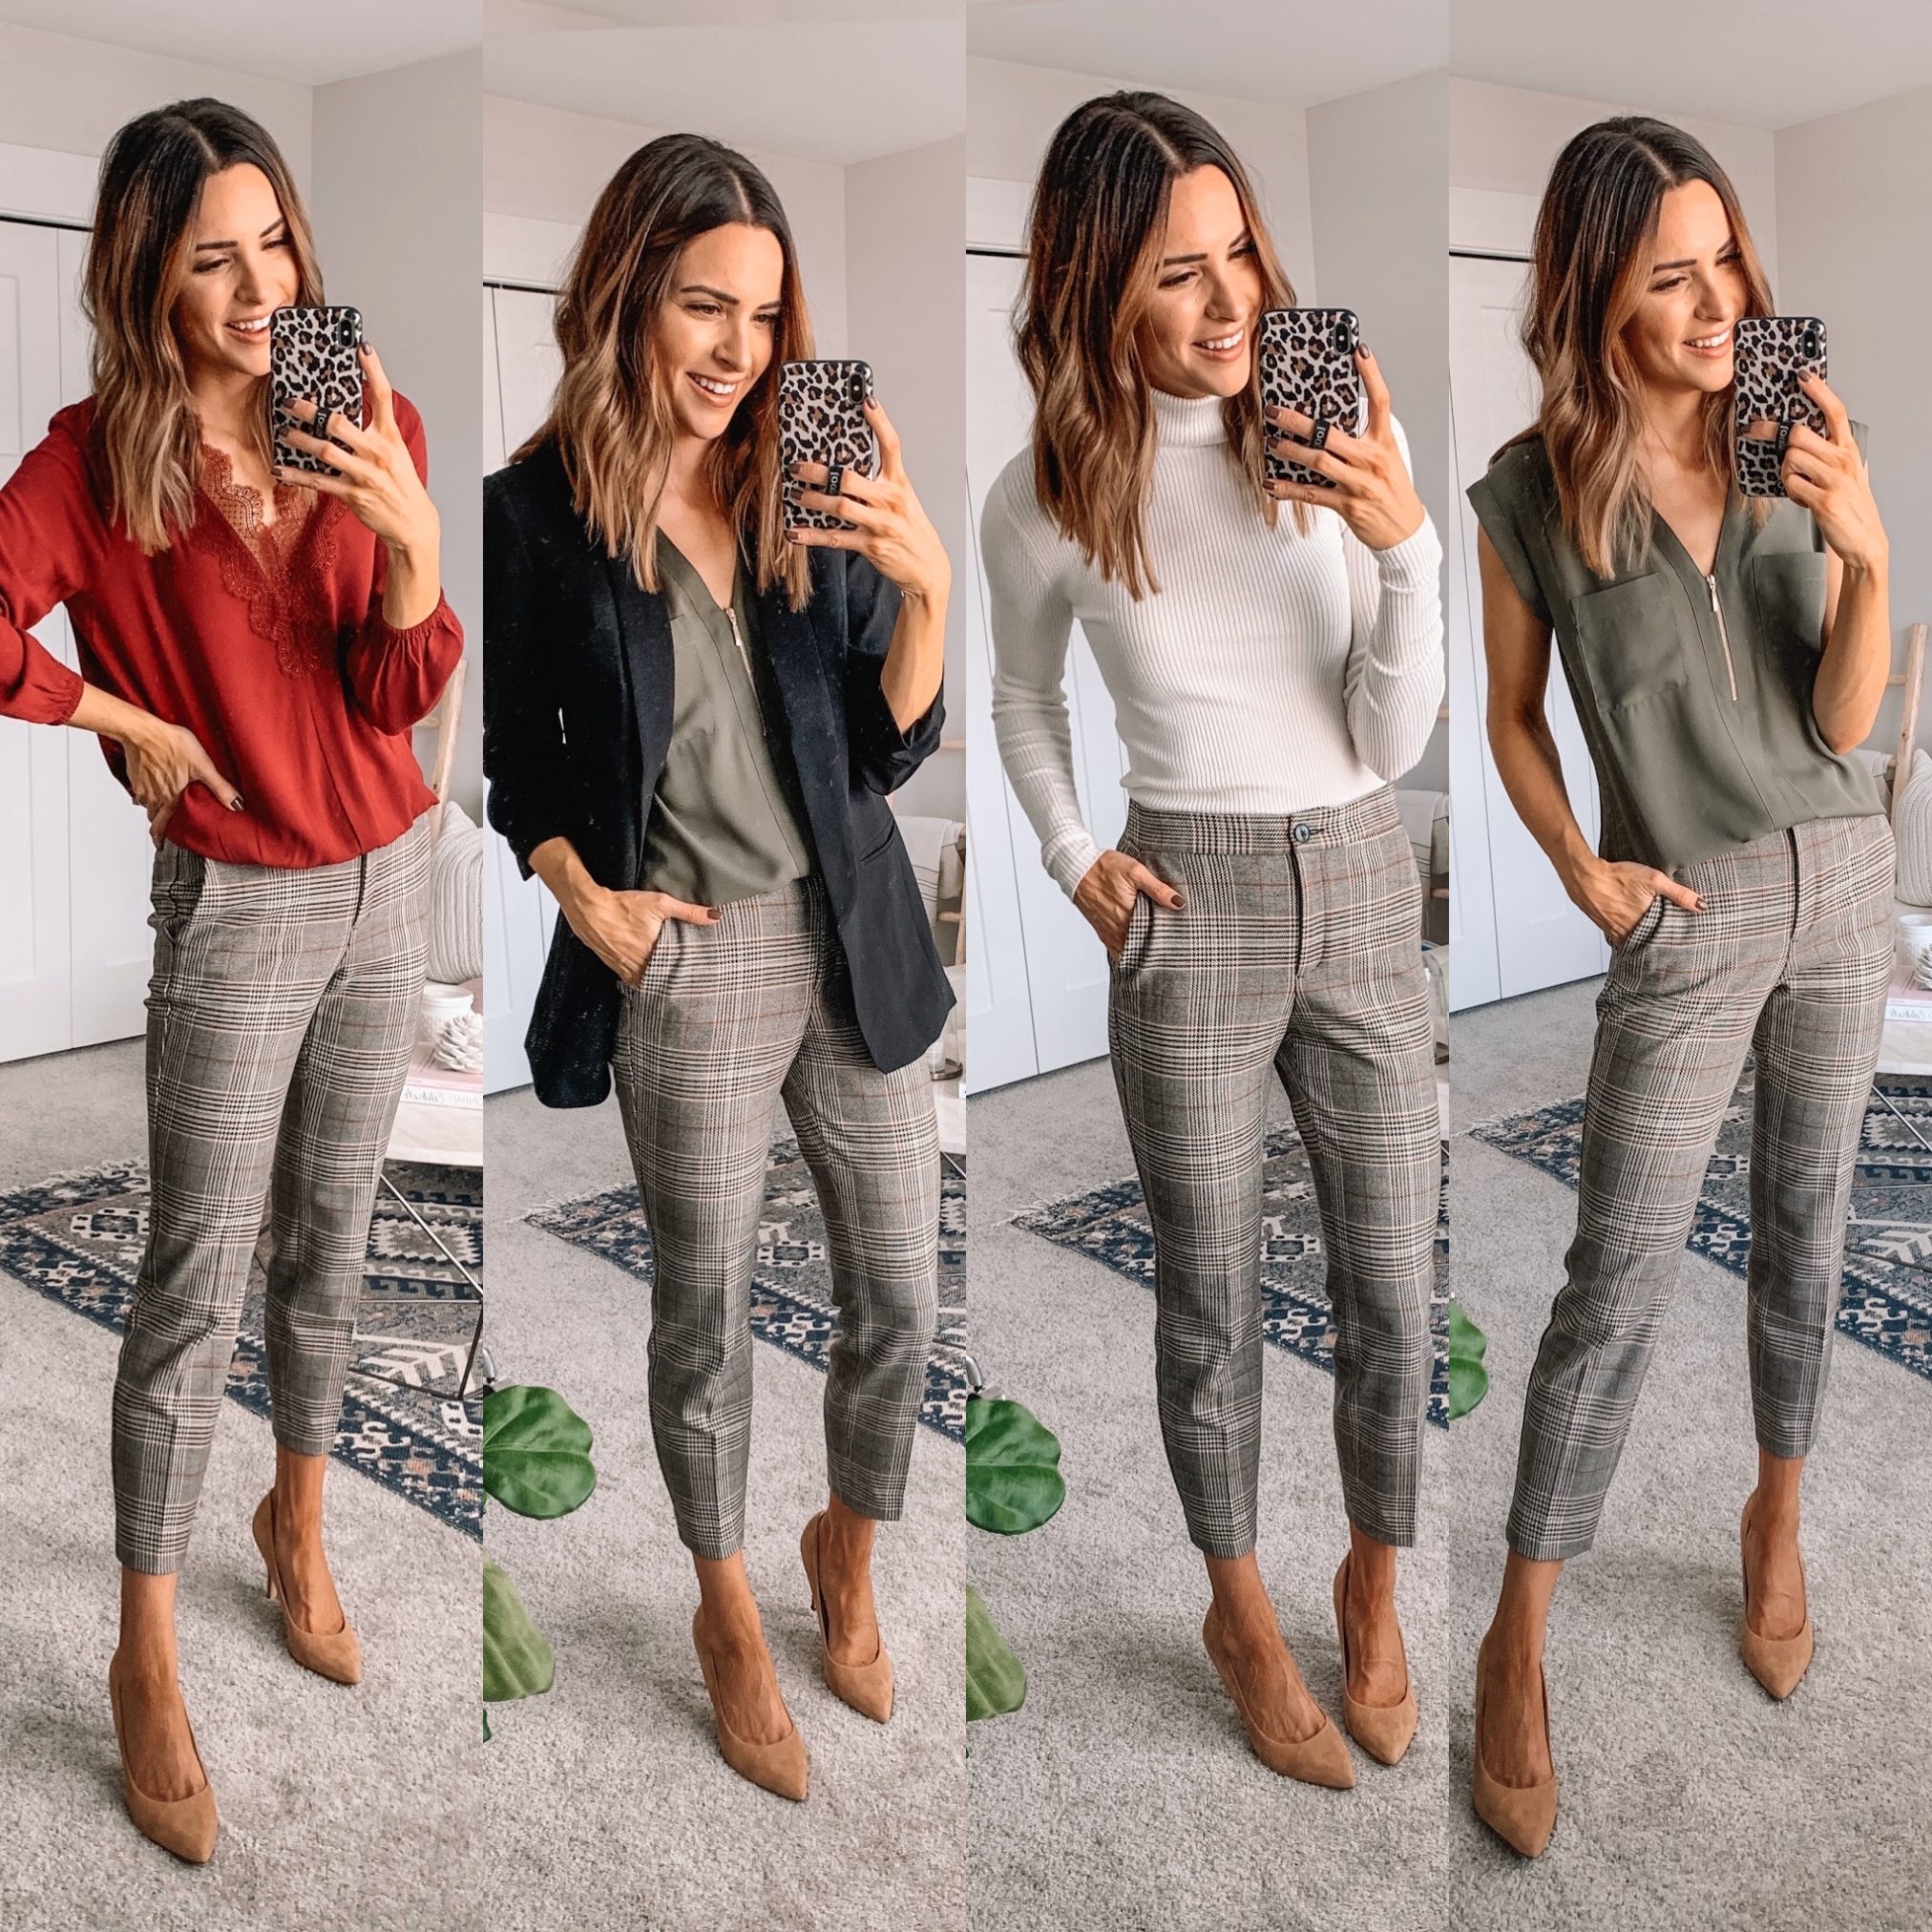 How to Style Plaid Pants for Work The Styled Press